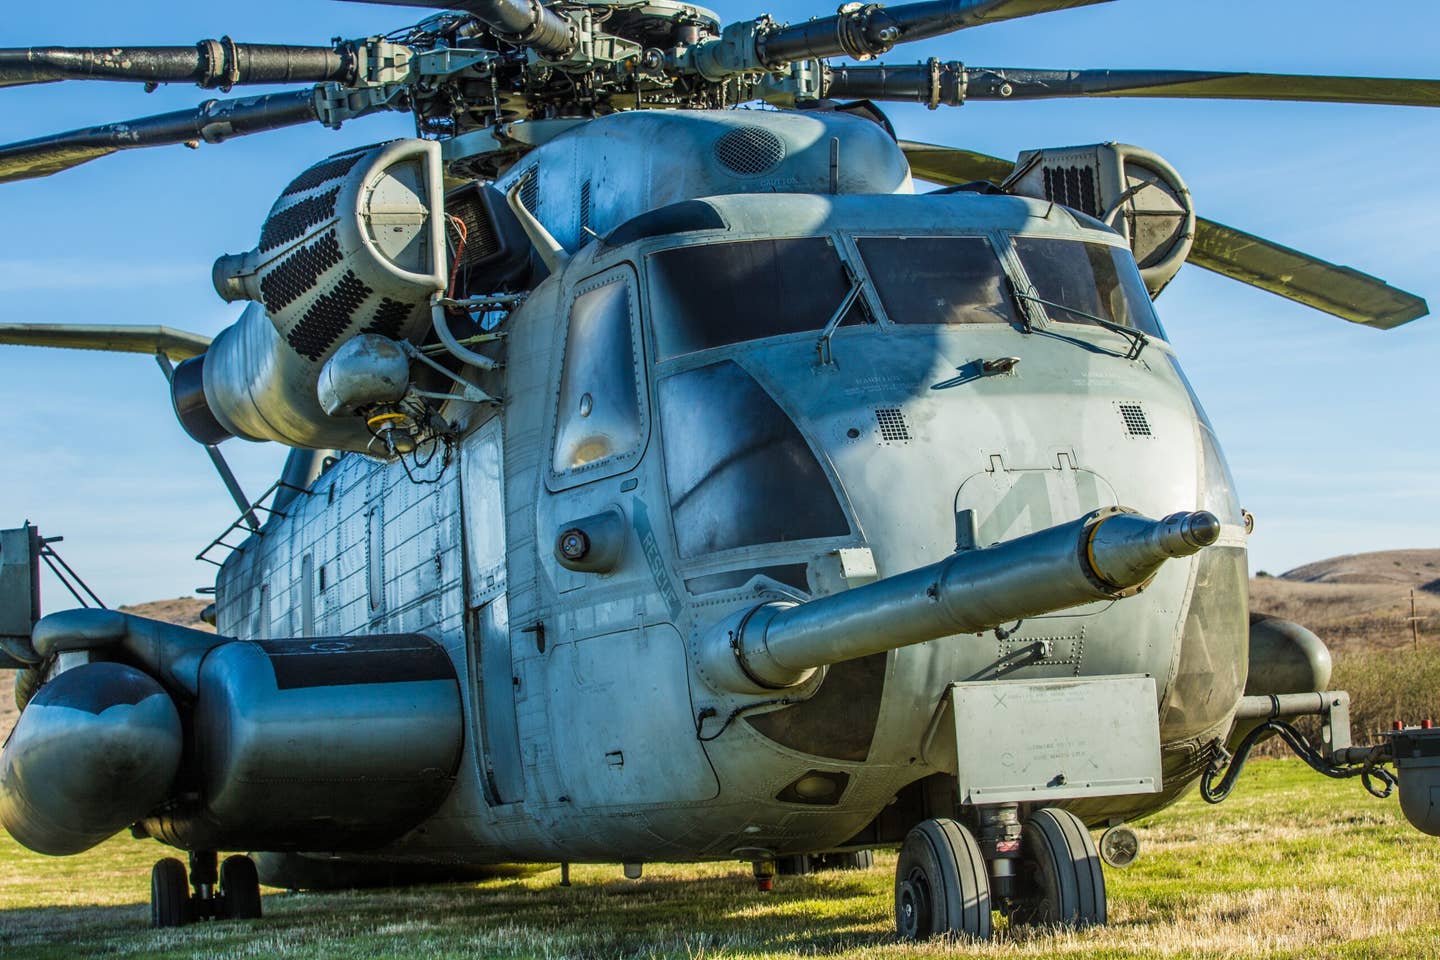 A Sikorsky CH-53E Super Stallion assigned to Marine Heavy Helicopter Squadron 361 waits for training to start for the day at Camp Pendleton, California, in January 2018. <em>U.S. Marine Corps photo by Lance Cpl. Dalton Swanbeck/Released</em><br>